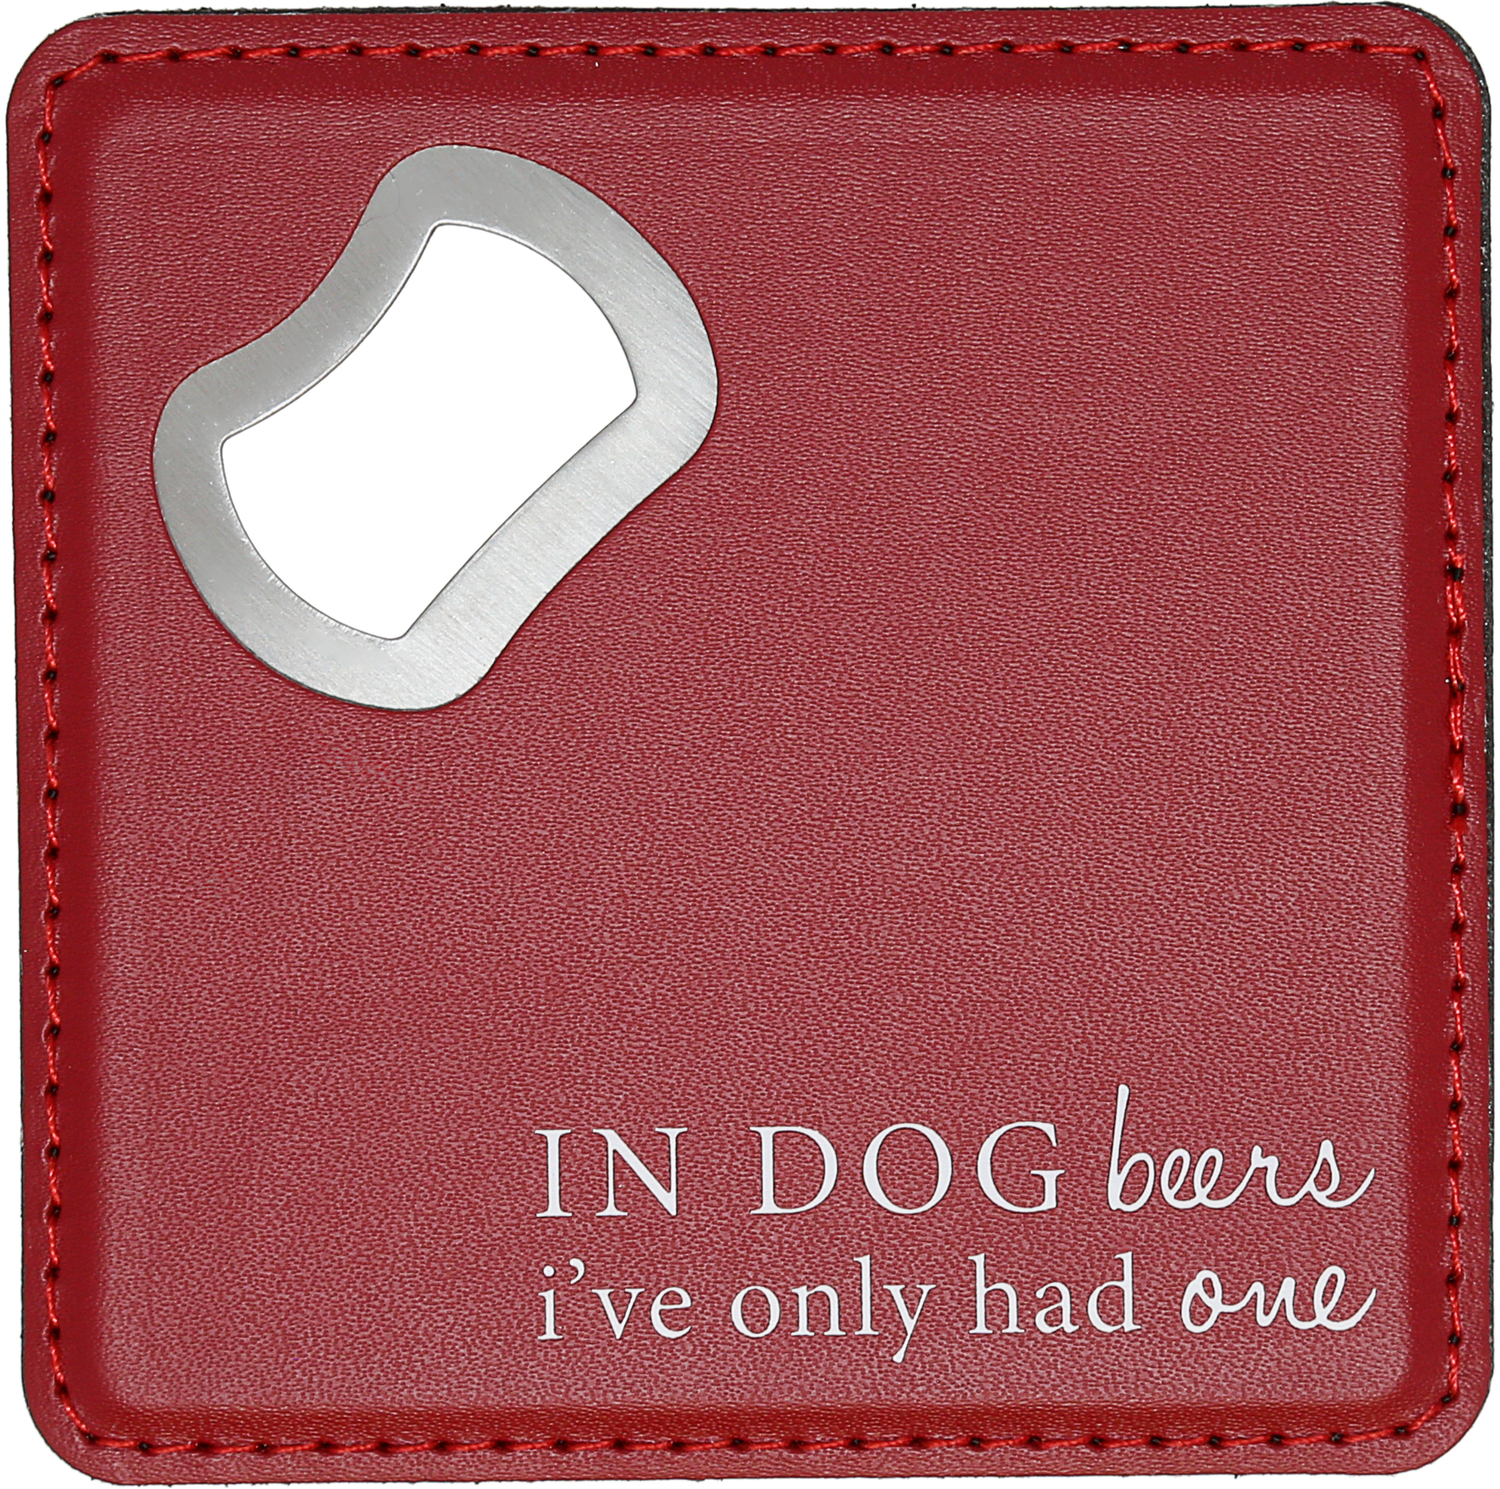 Dog Beers by A-Parent-ly - Dog Beers - 4" x 4" Bottle Opener Coaster